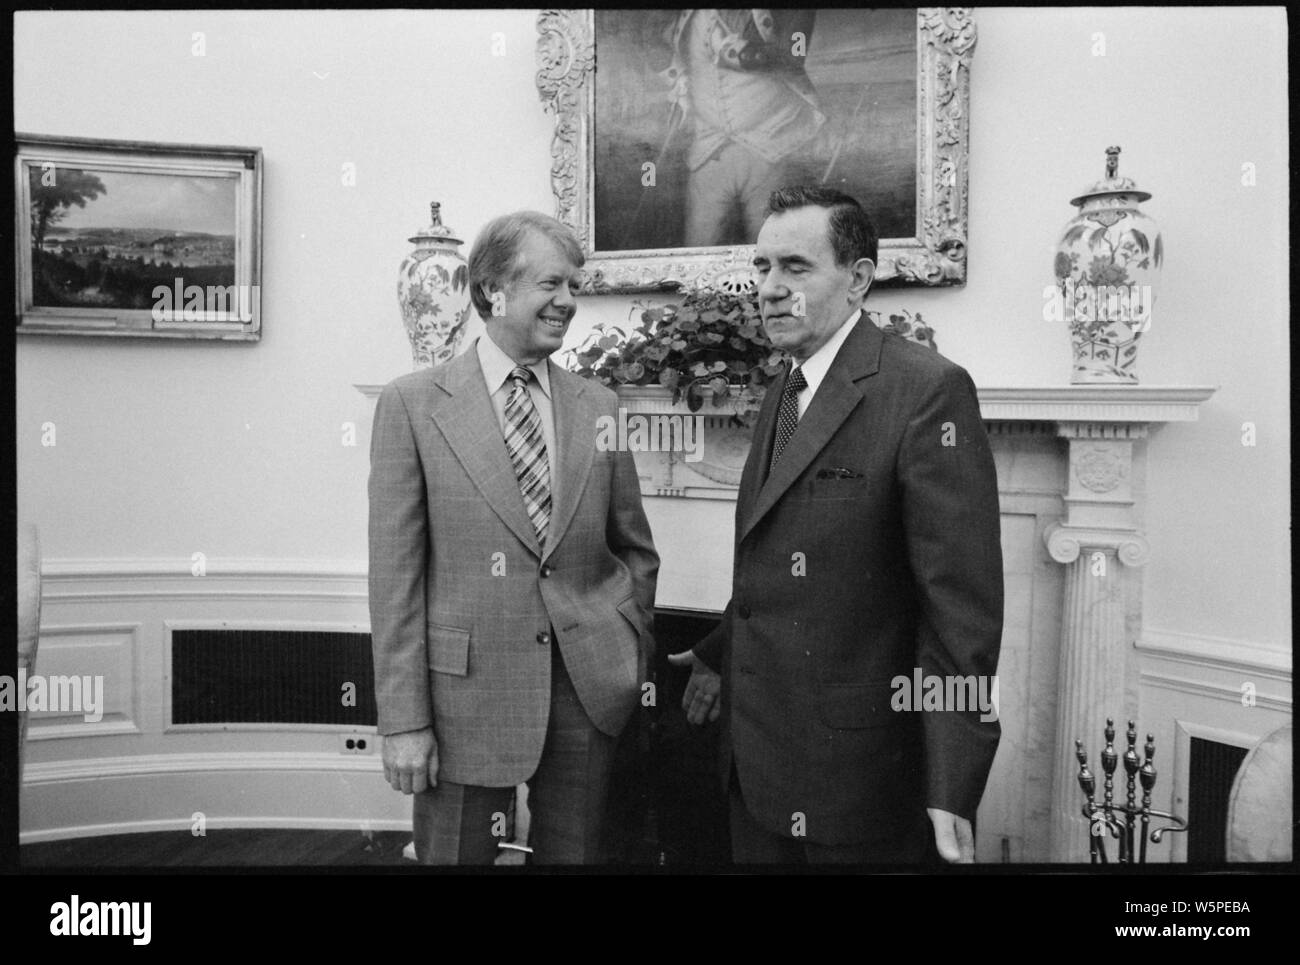 Jimmy Carter with Andrei Gromyko, Minister of Foreign Affairs of the Union of Soviet Socialist Republic. Stock Photo